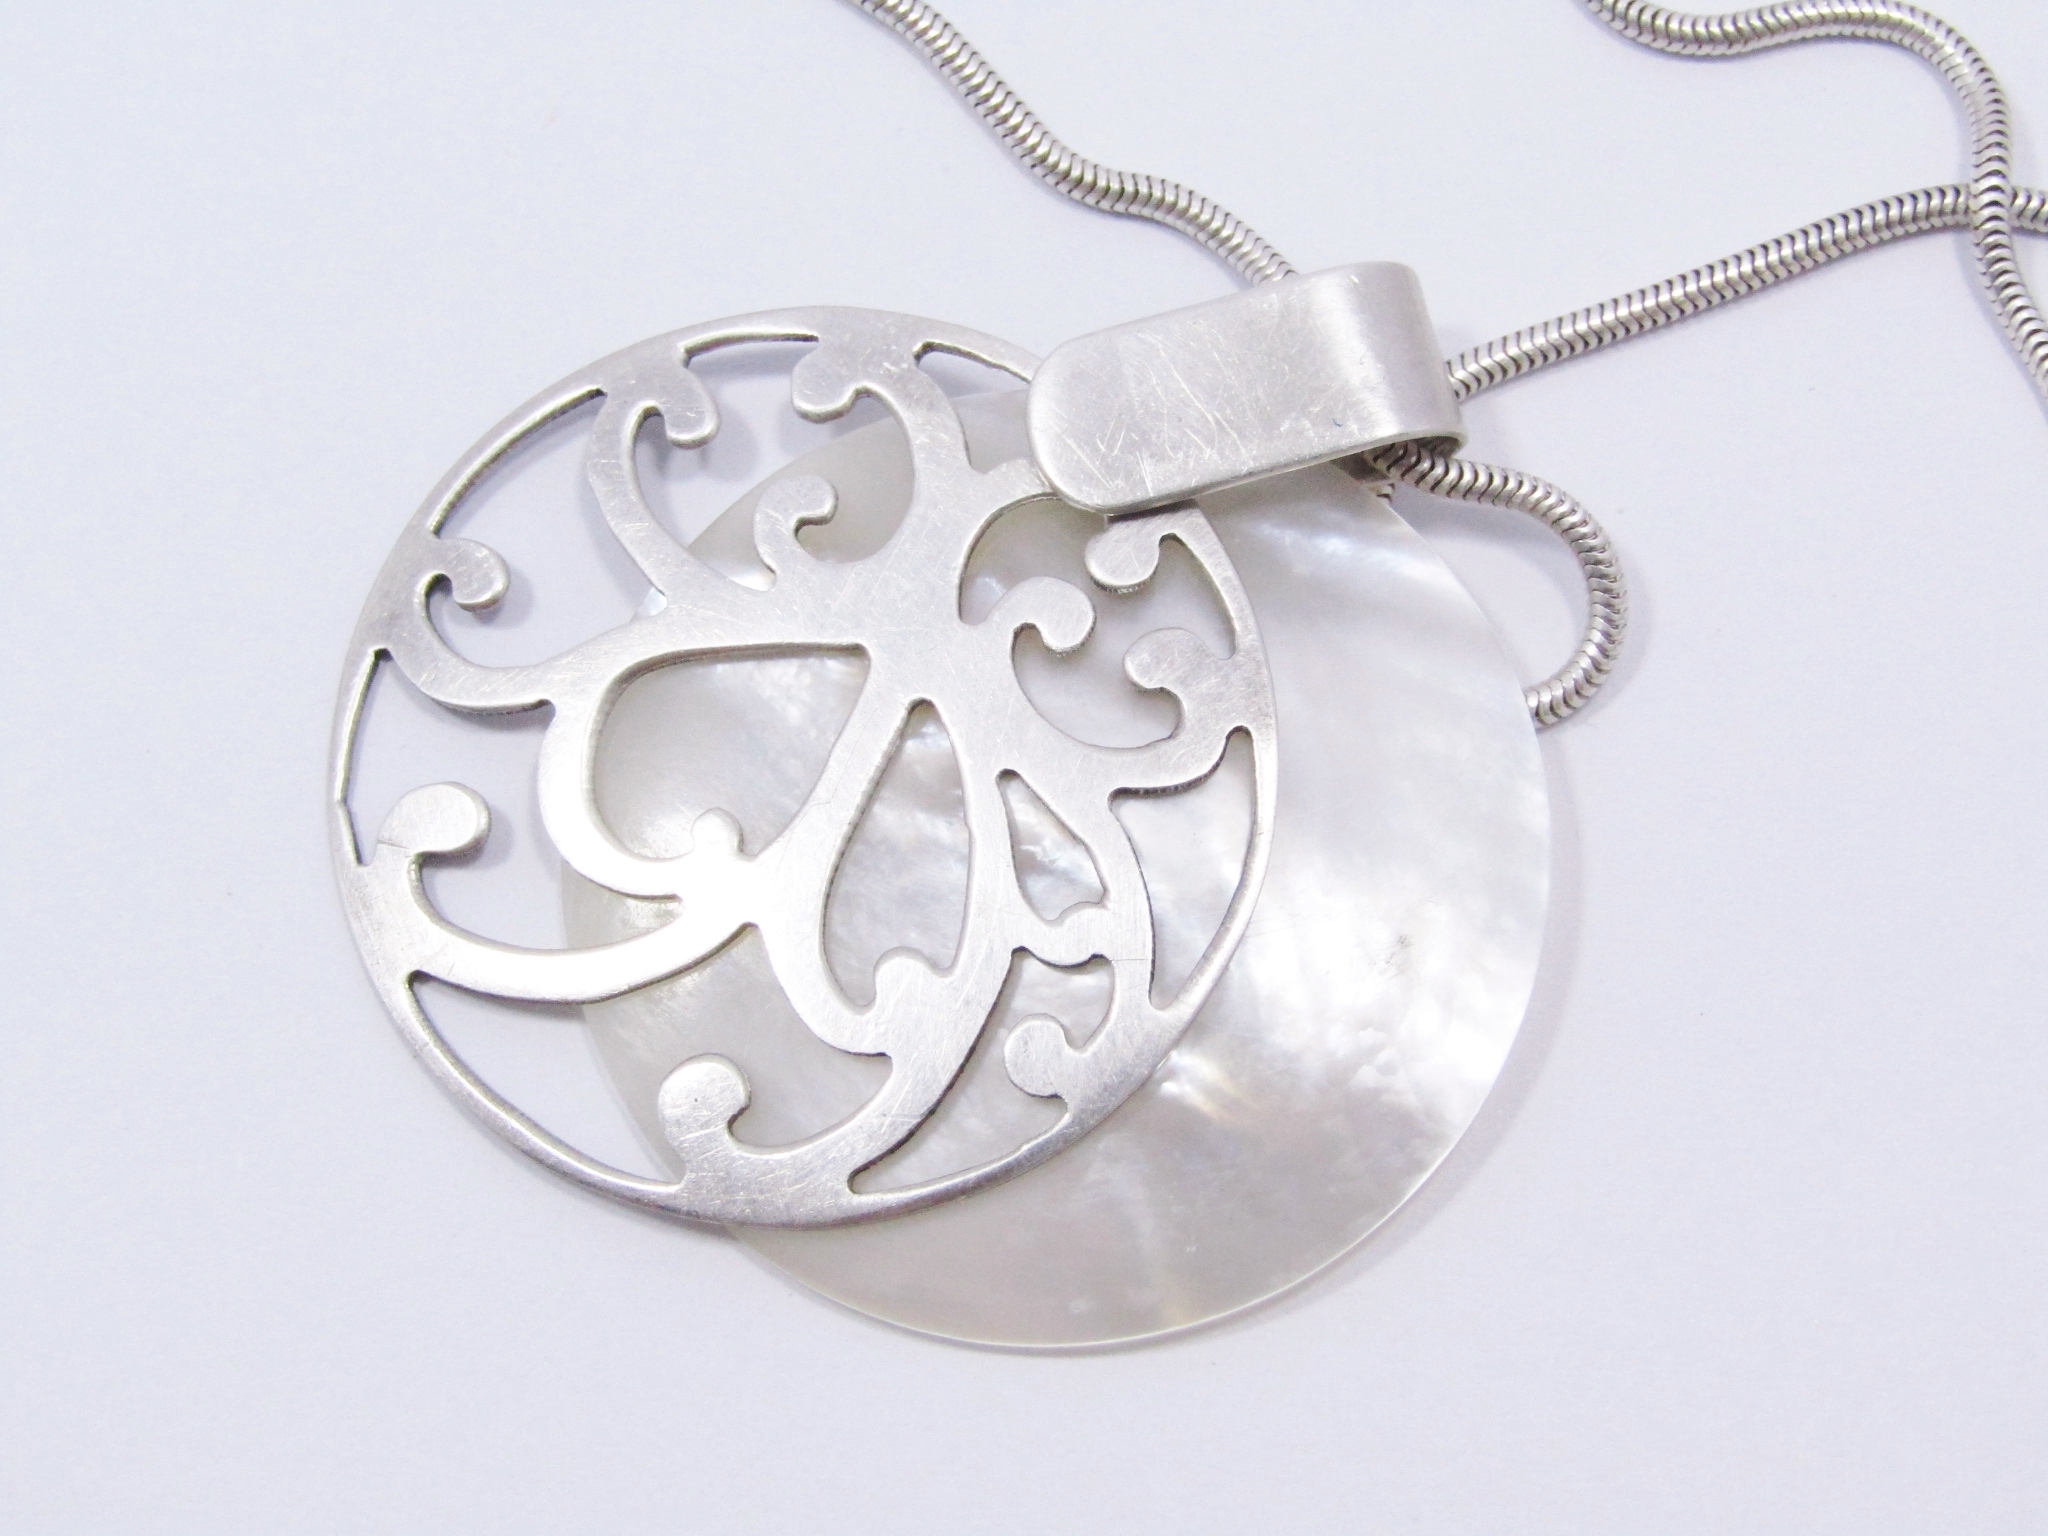 A Stunning Large Mother of Pearl Pendant On Chain in Sterling Silver.